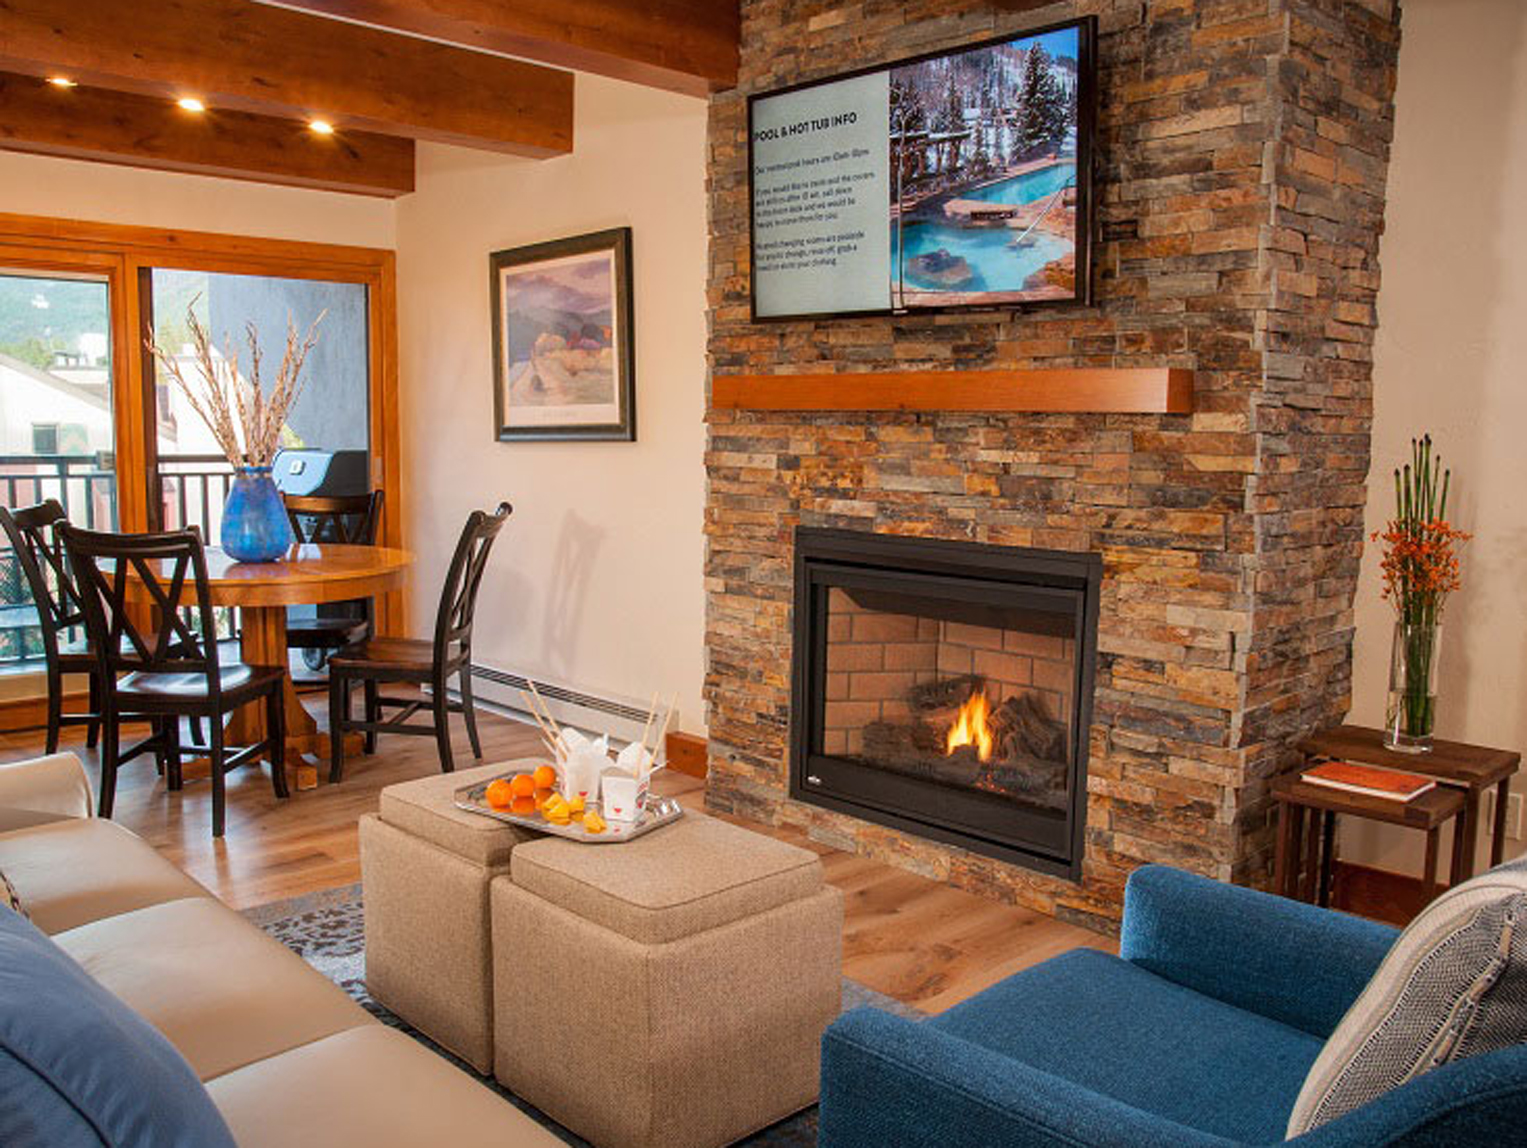 A stay at Antlers at Vail always features spacious condominiums – from studio to 4-bedroom – containing flat-screen TVs, gas fireplaces, fully-equipped kitchens and private balconies.